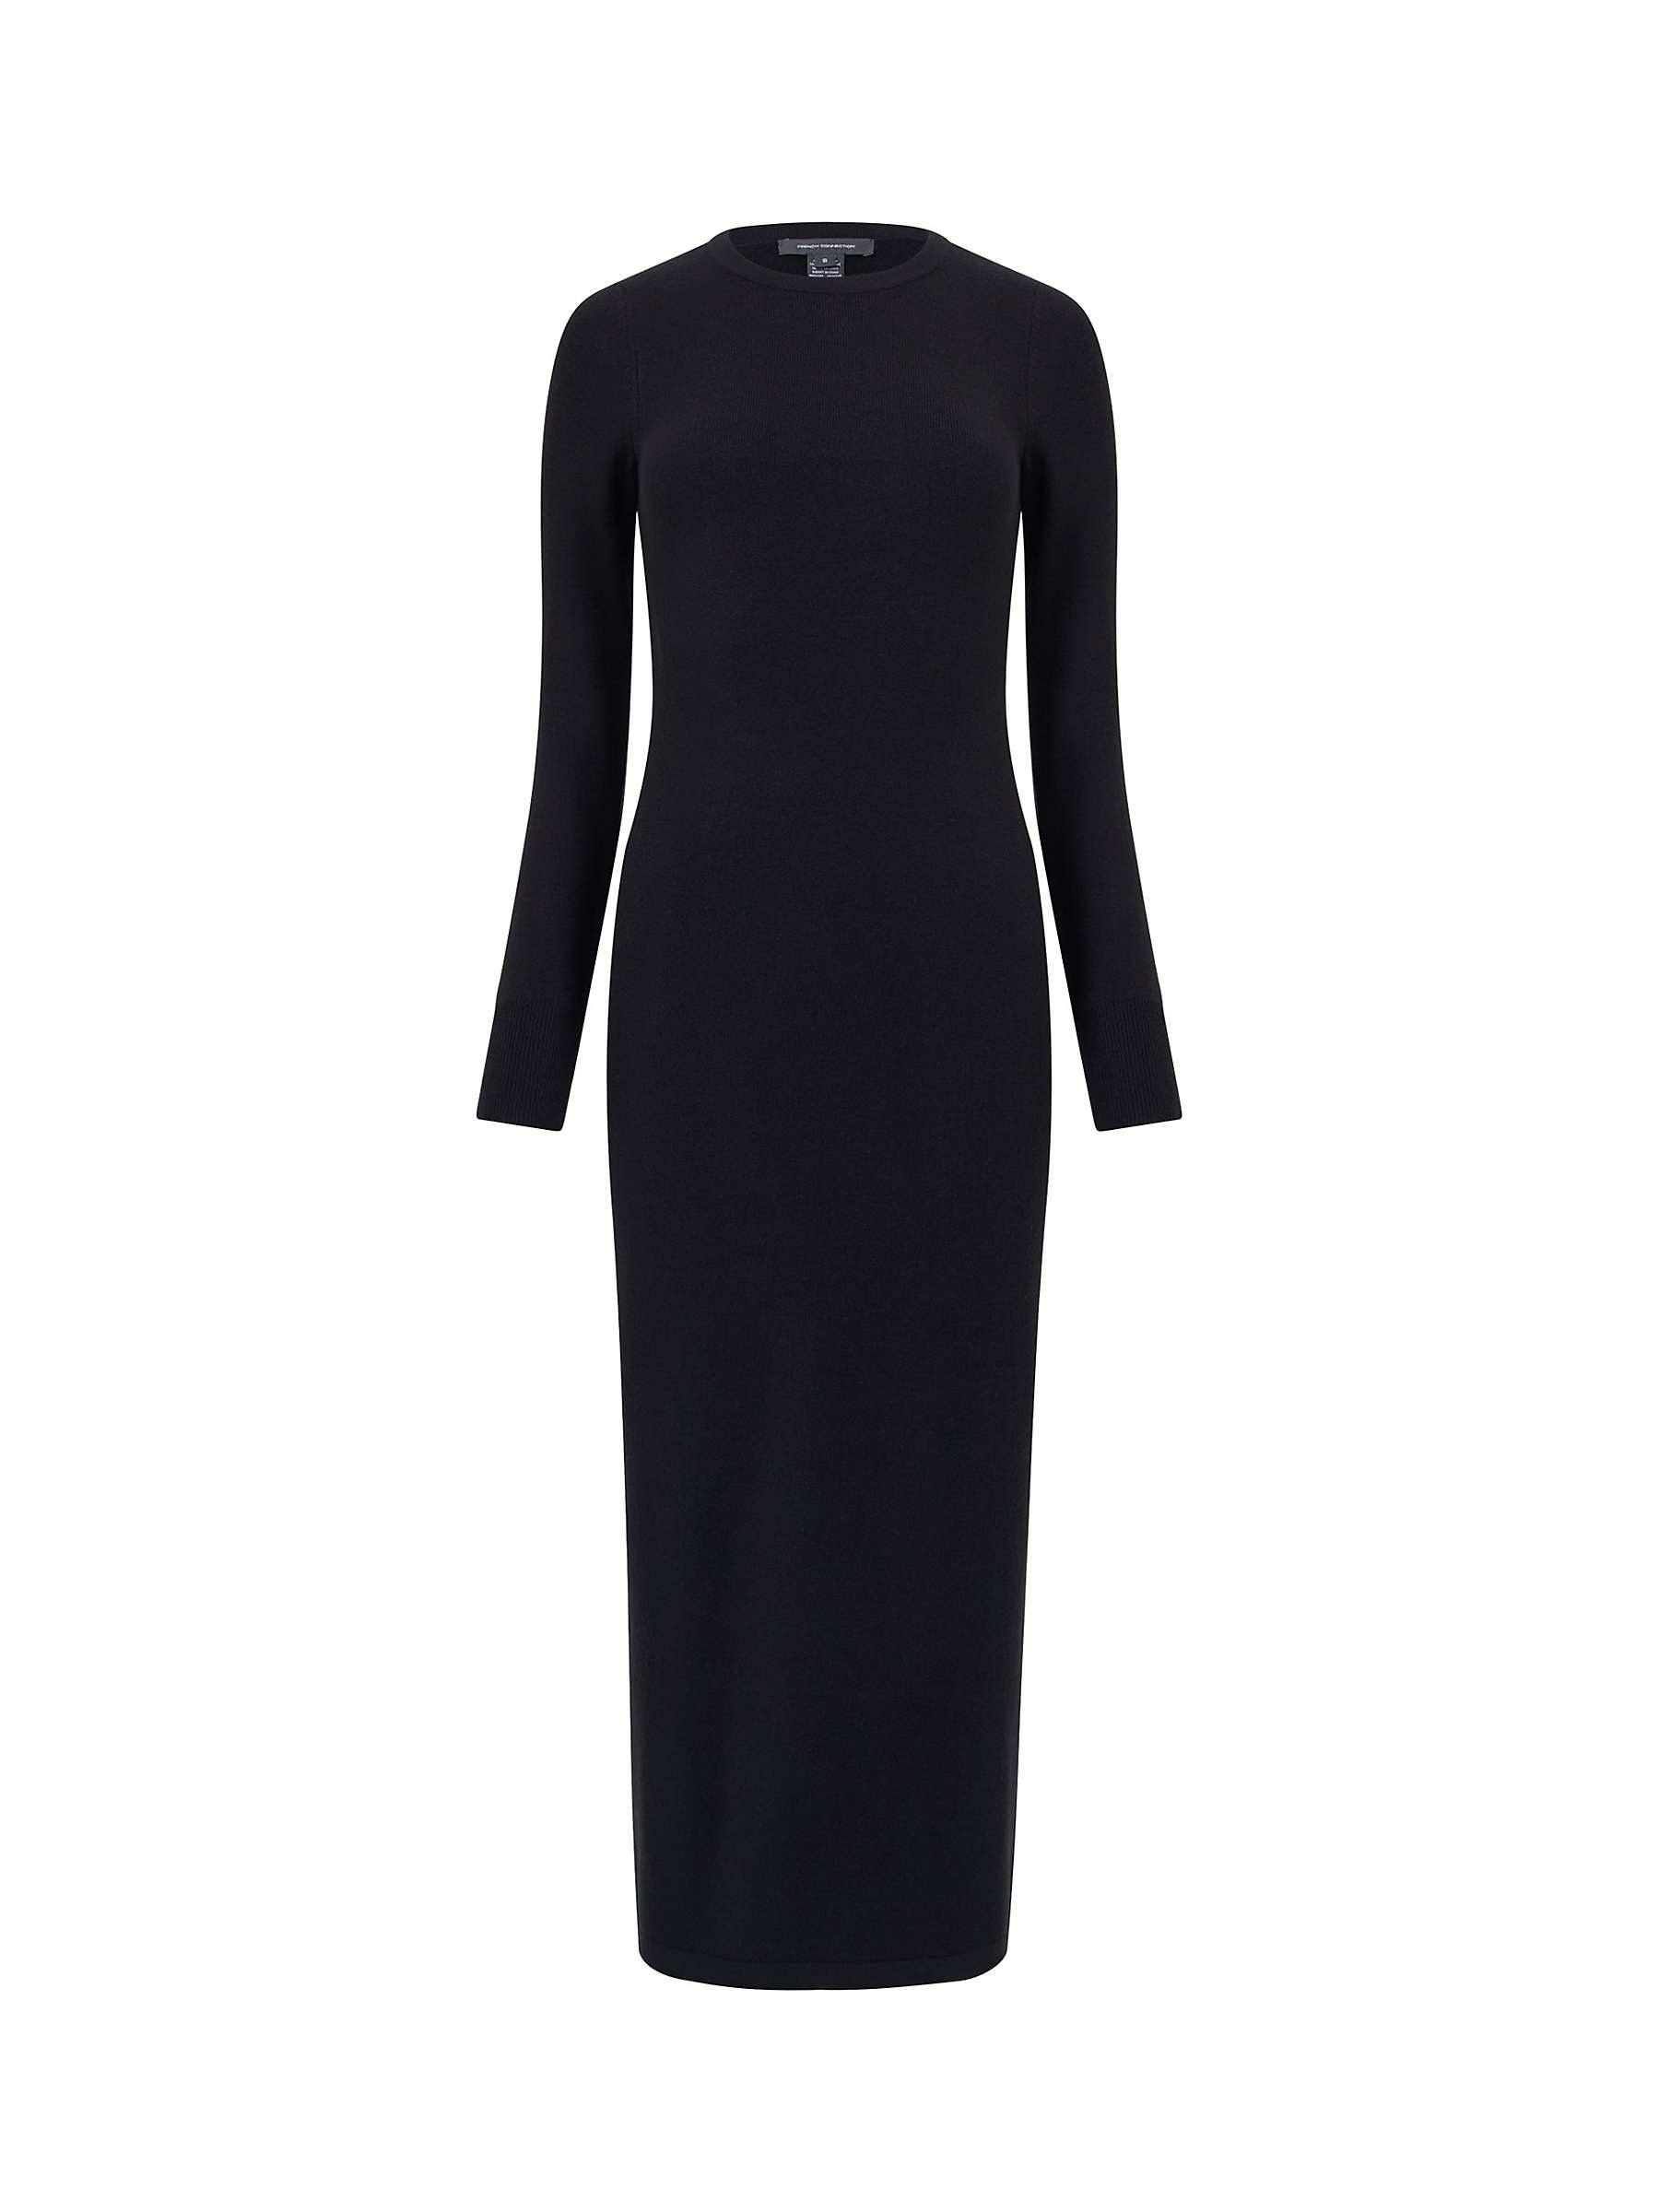 French Connection Babysoft Crew Neck Dress, Black at John Lewis & Partners